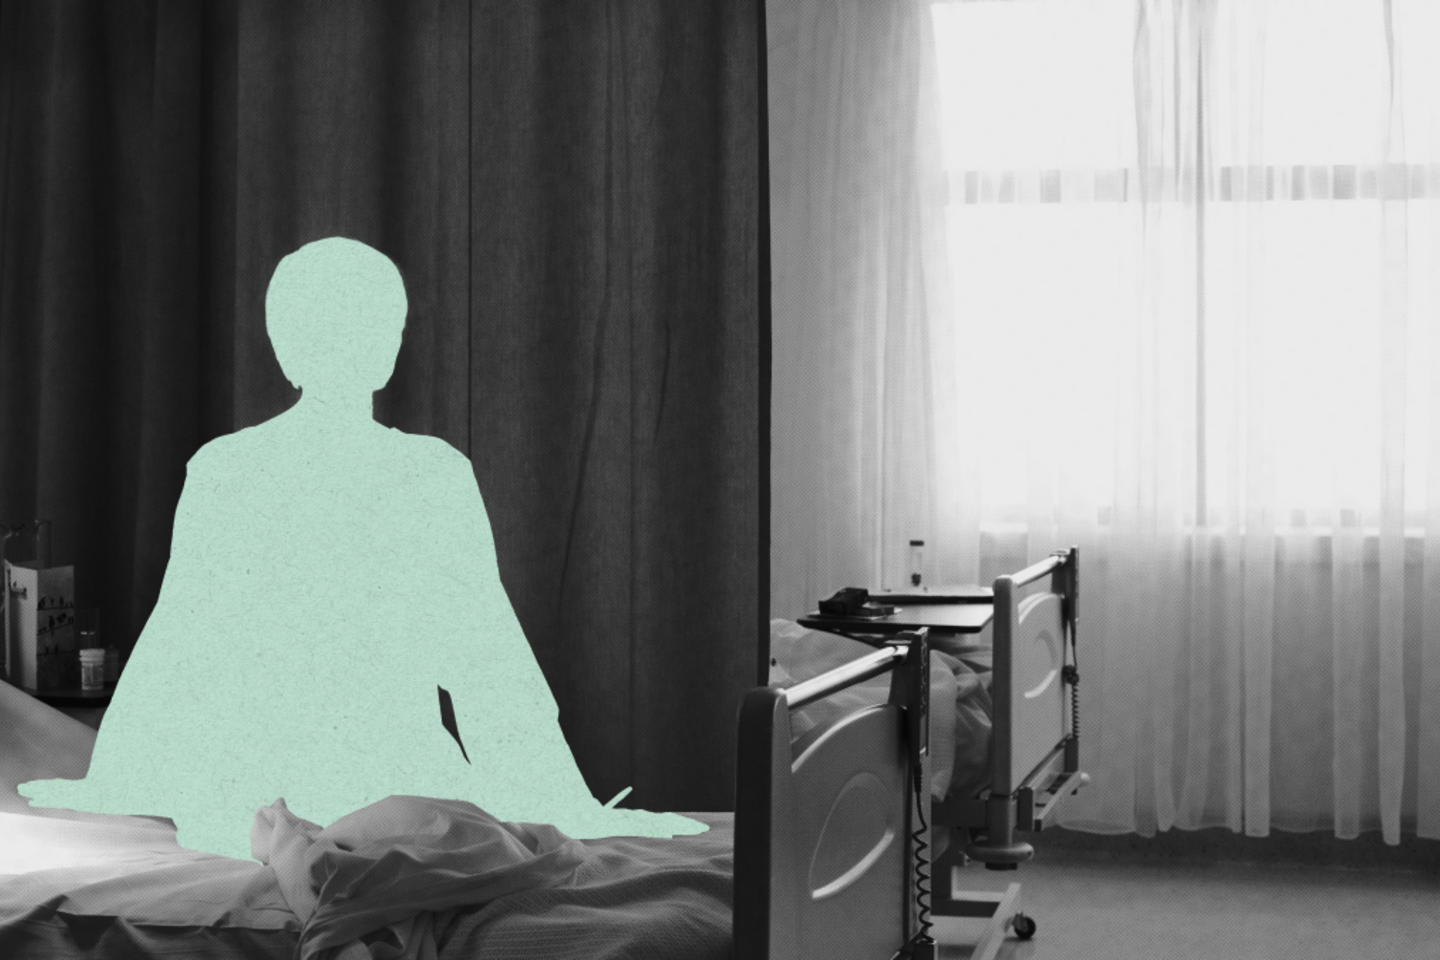 A silhouette of someone with short hair seated on a hospital bed